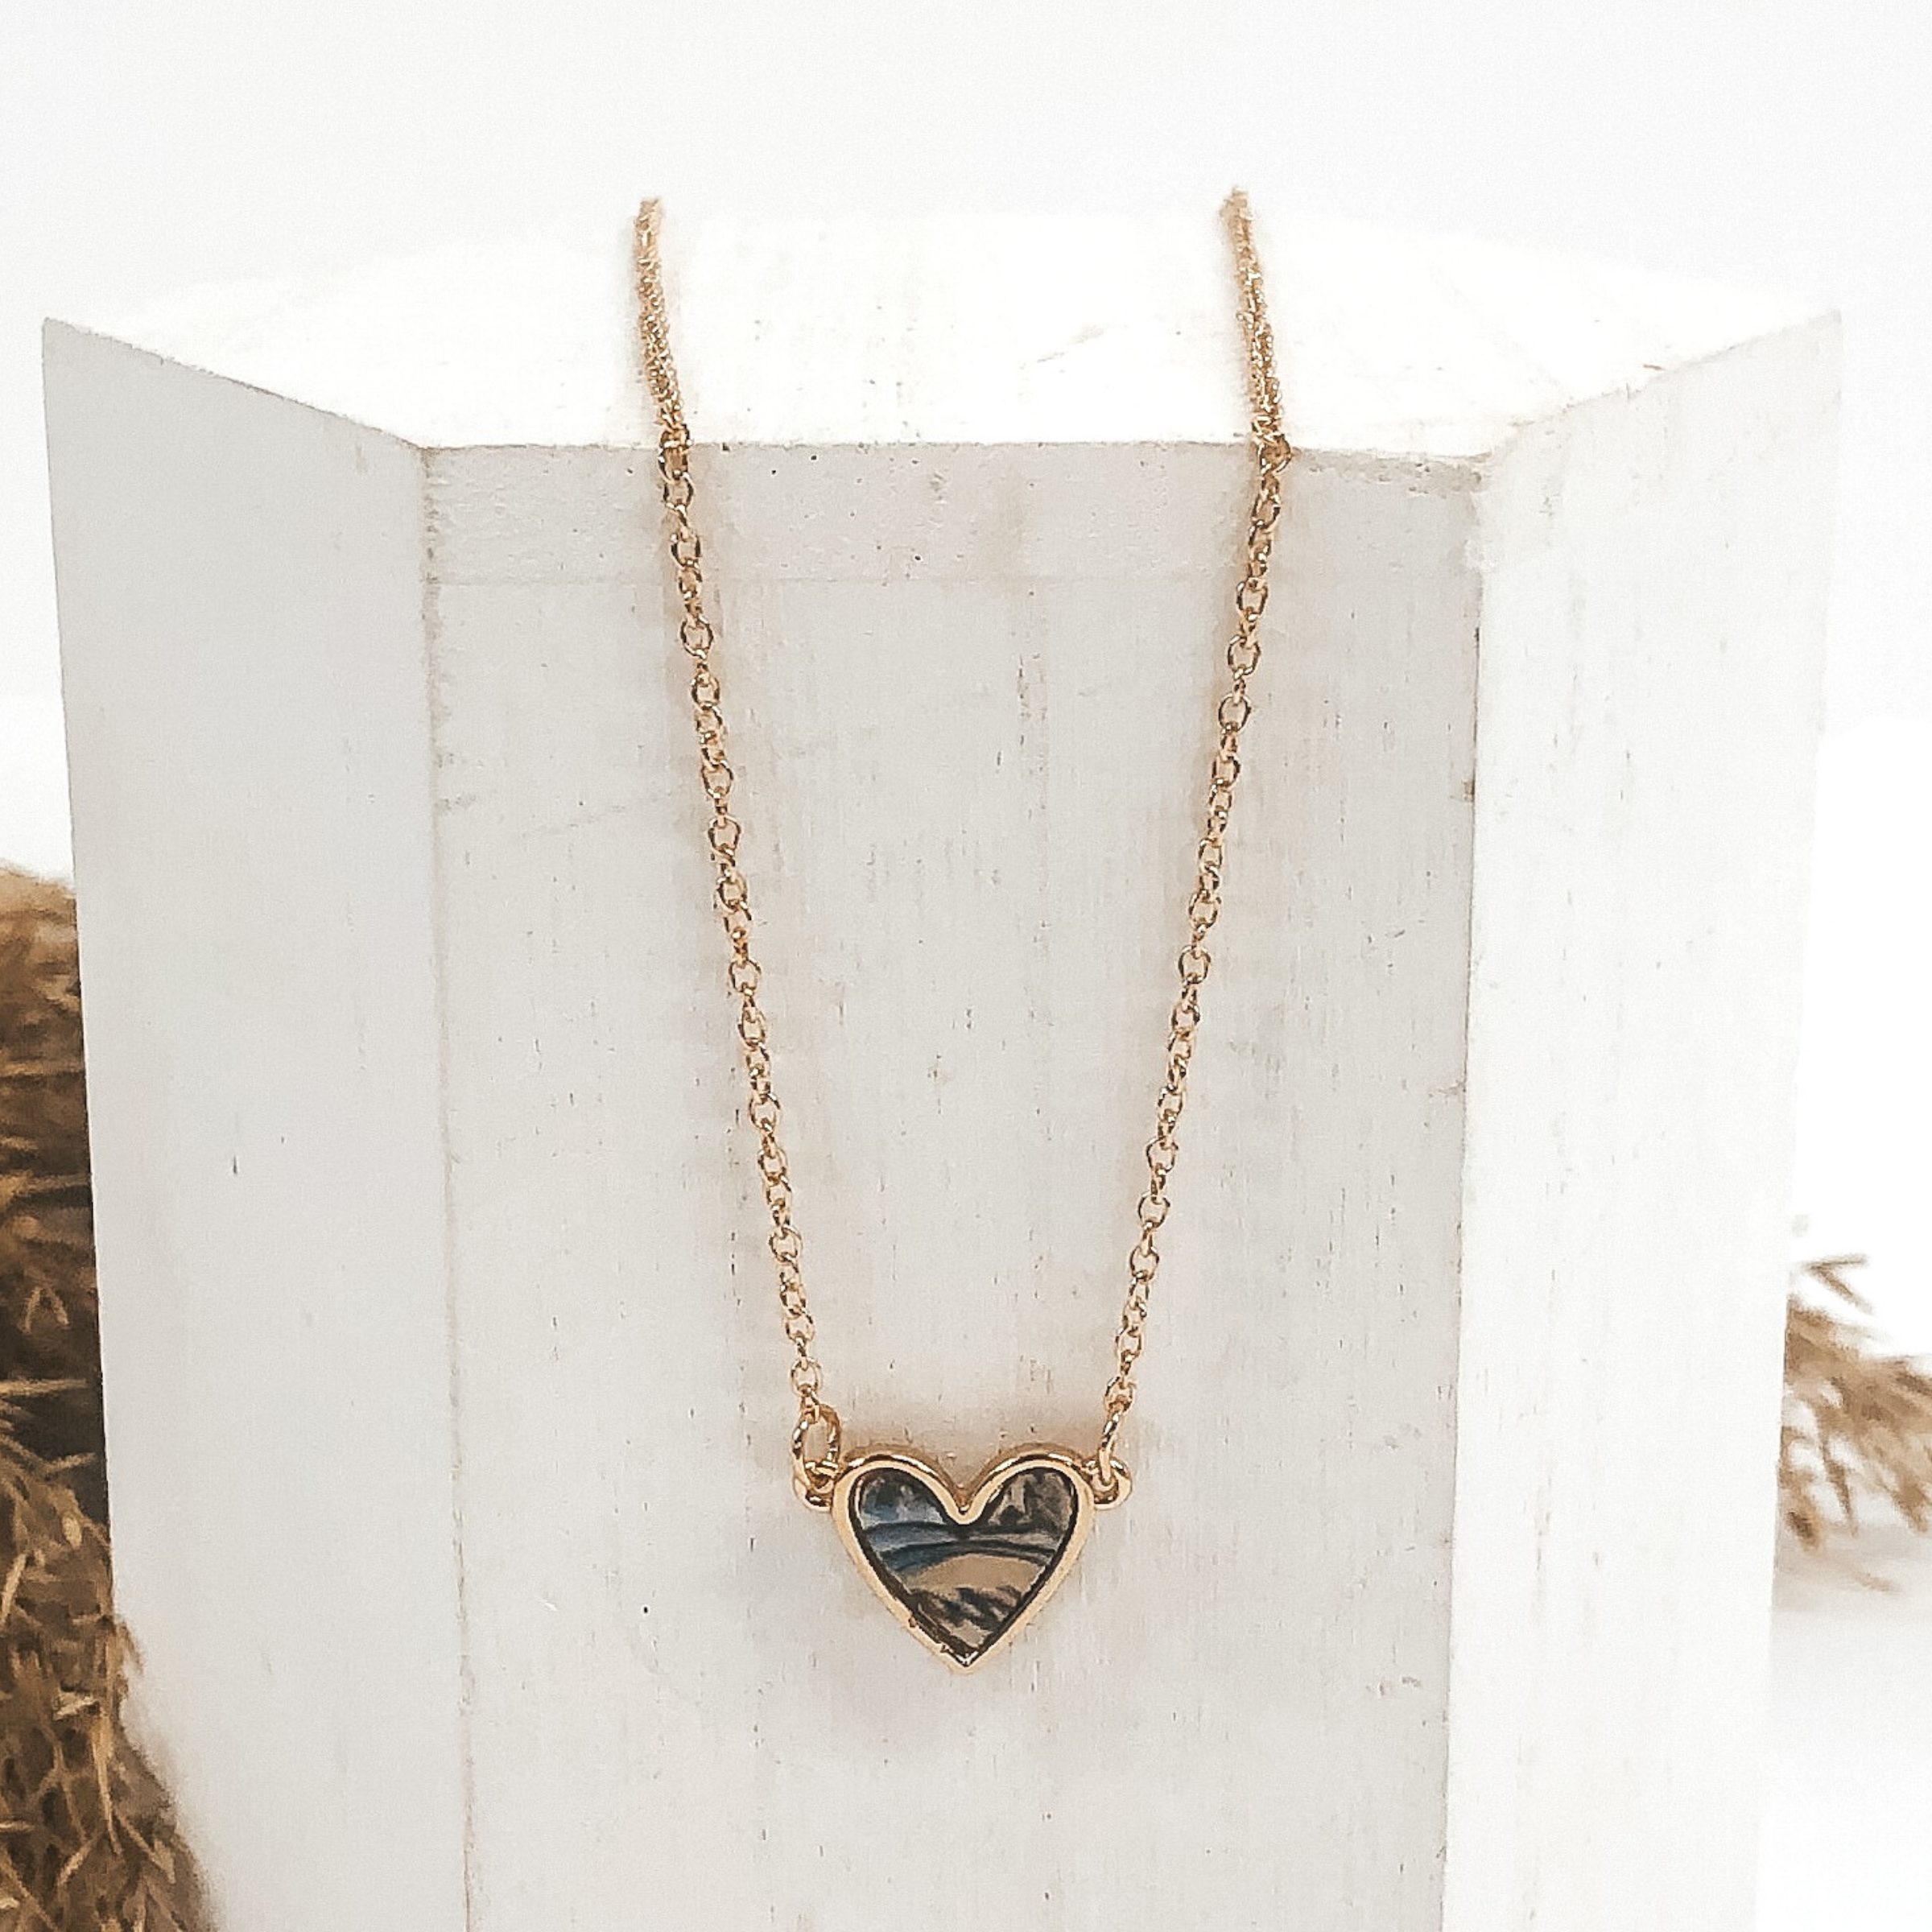 Thin gold chained necklace is a small, abalone shell heart pendant that is outlined in gold. This necklace is pictured laying on a white block on a white background. 